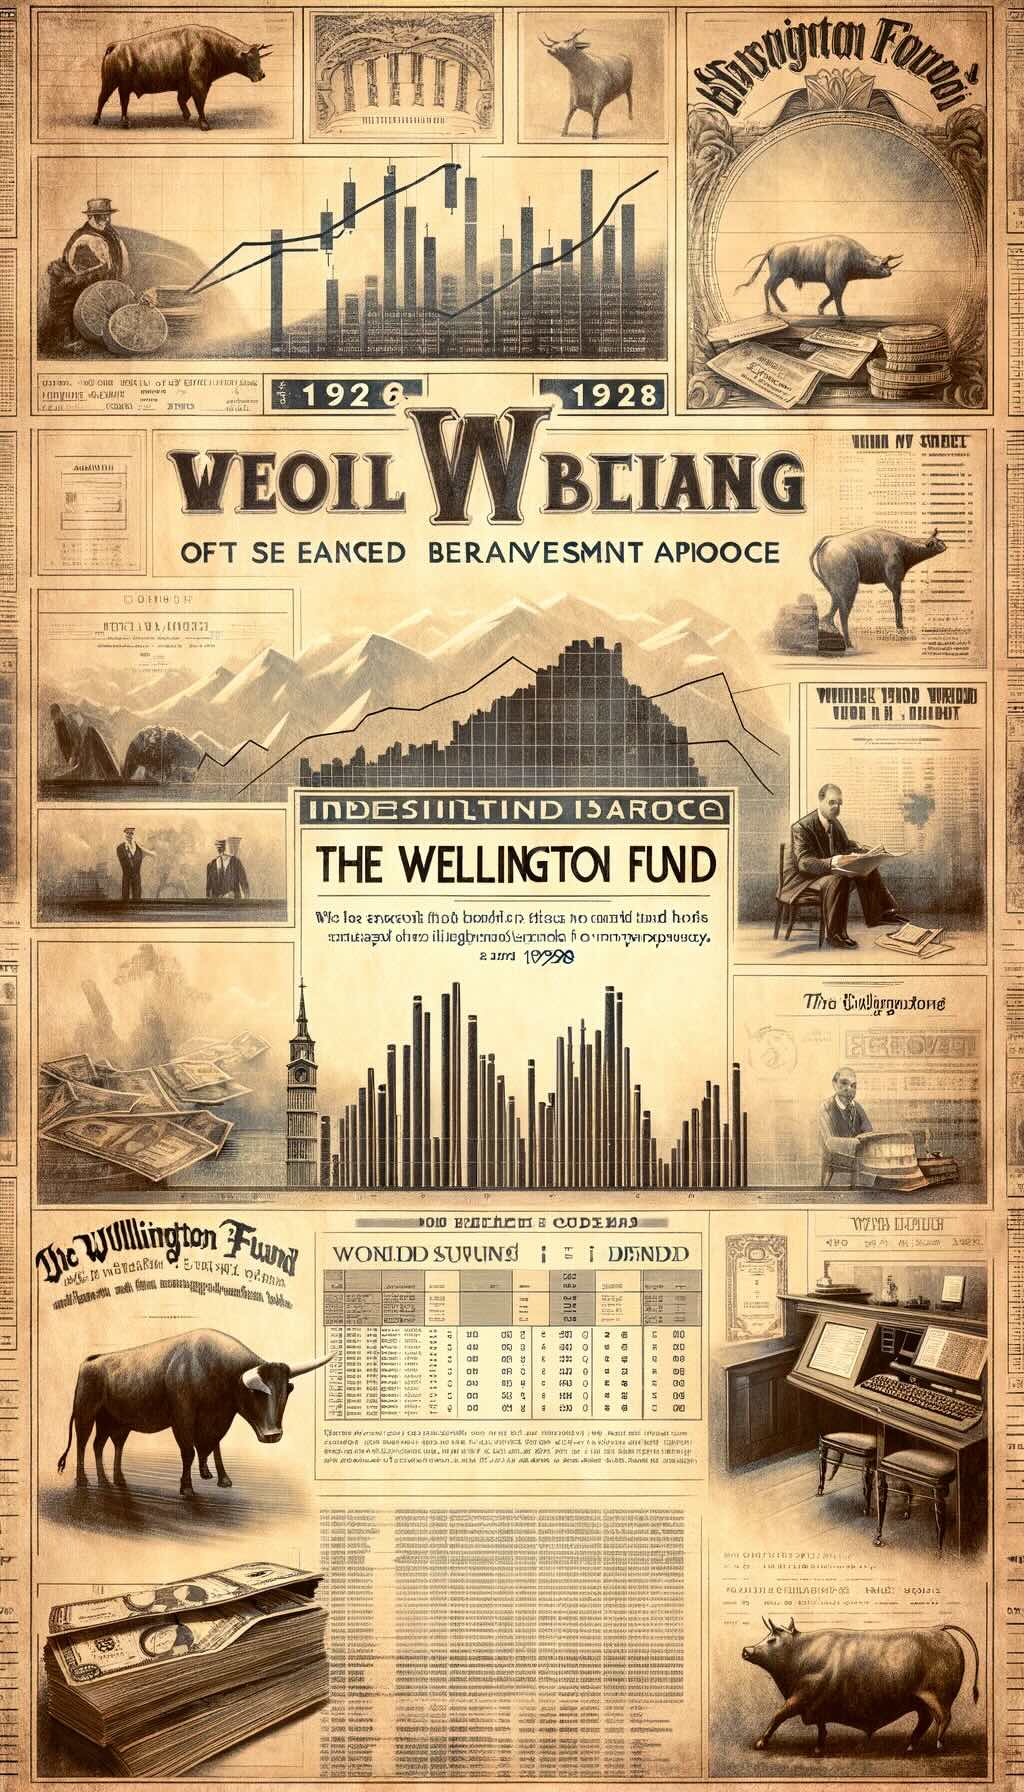 Wellington Fund capturing its innovative balanced investment approach from 1928